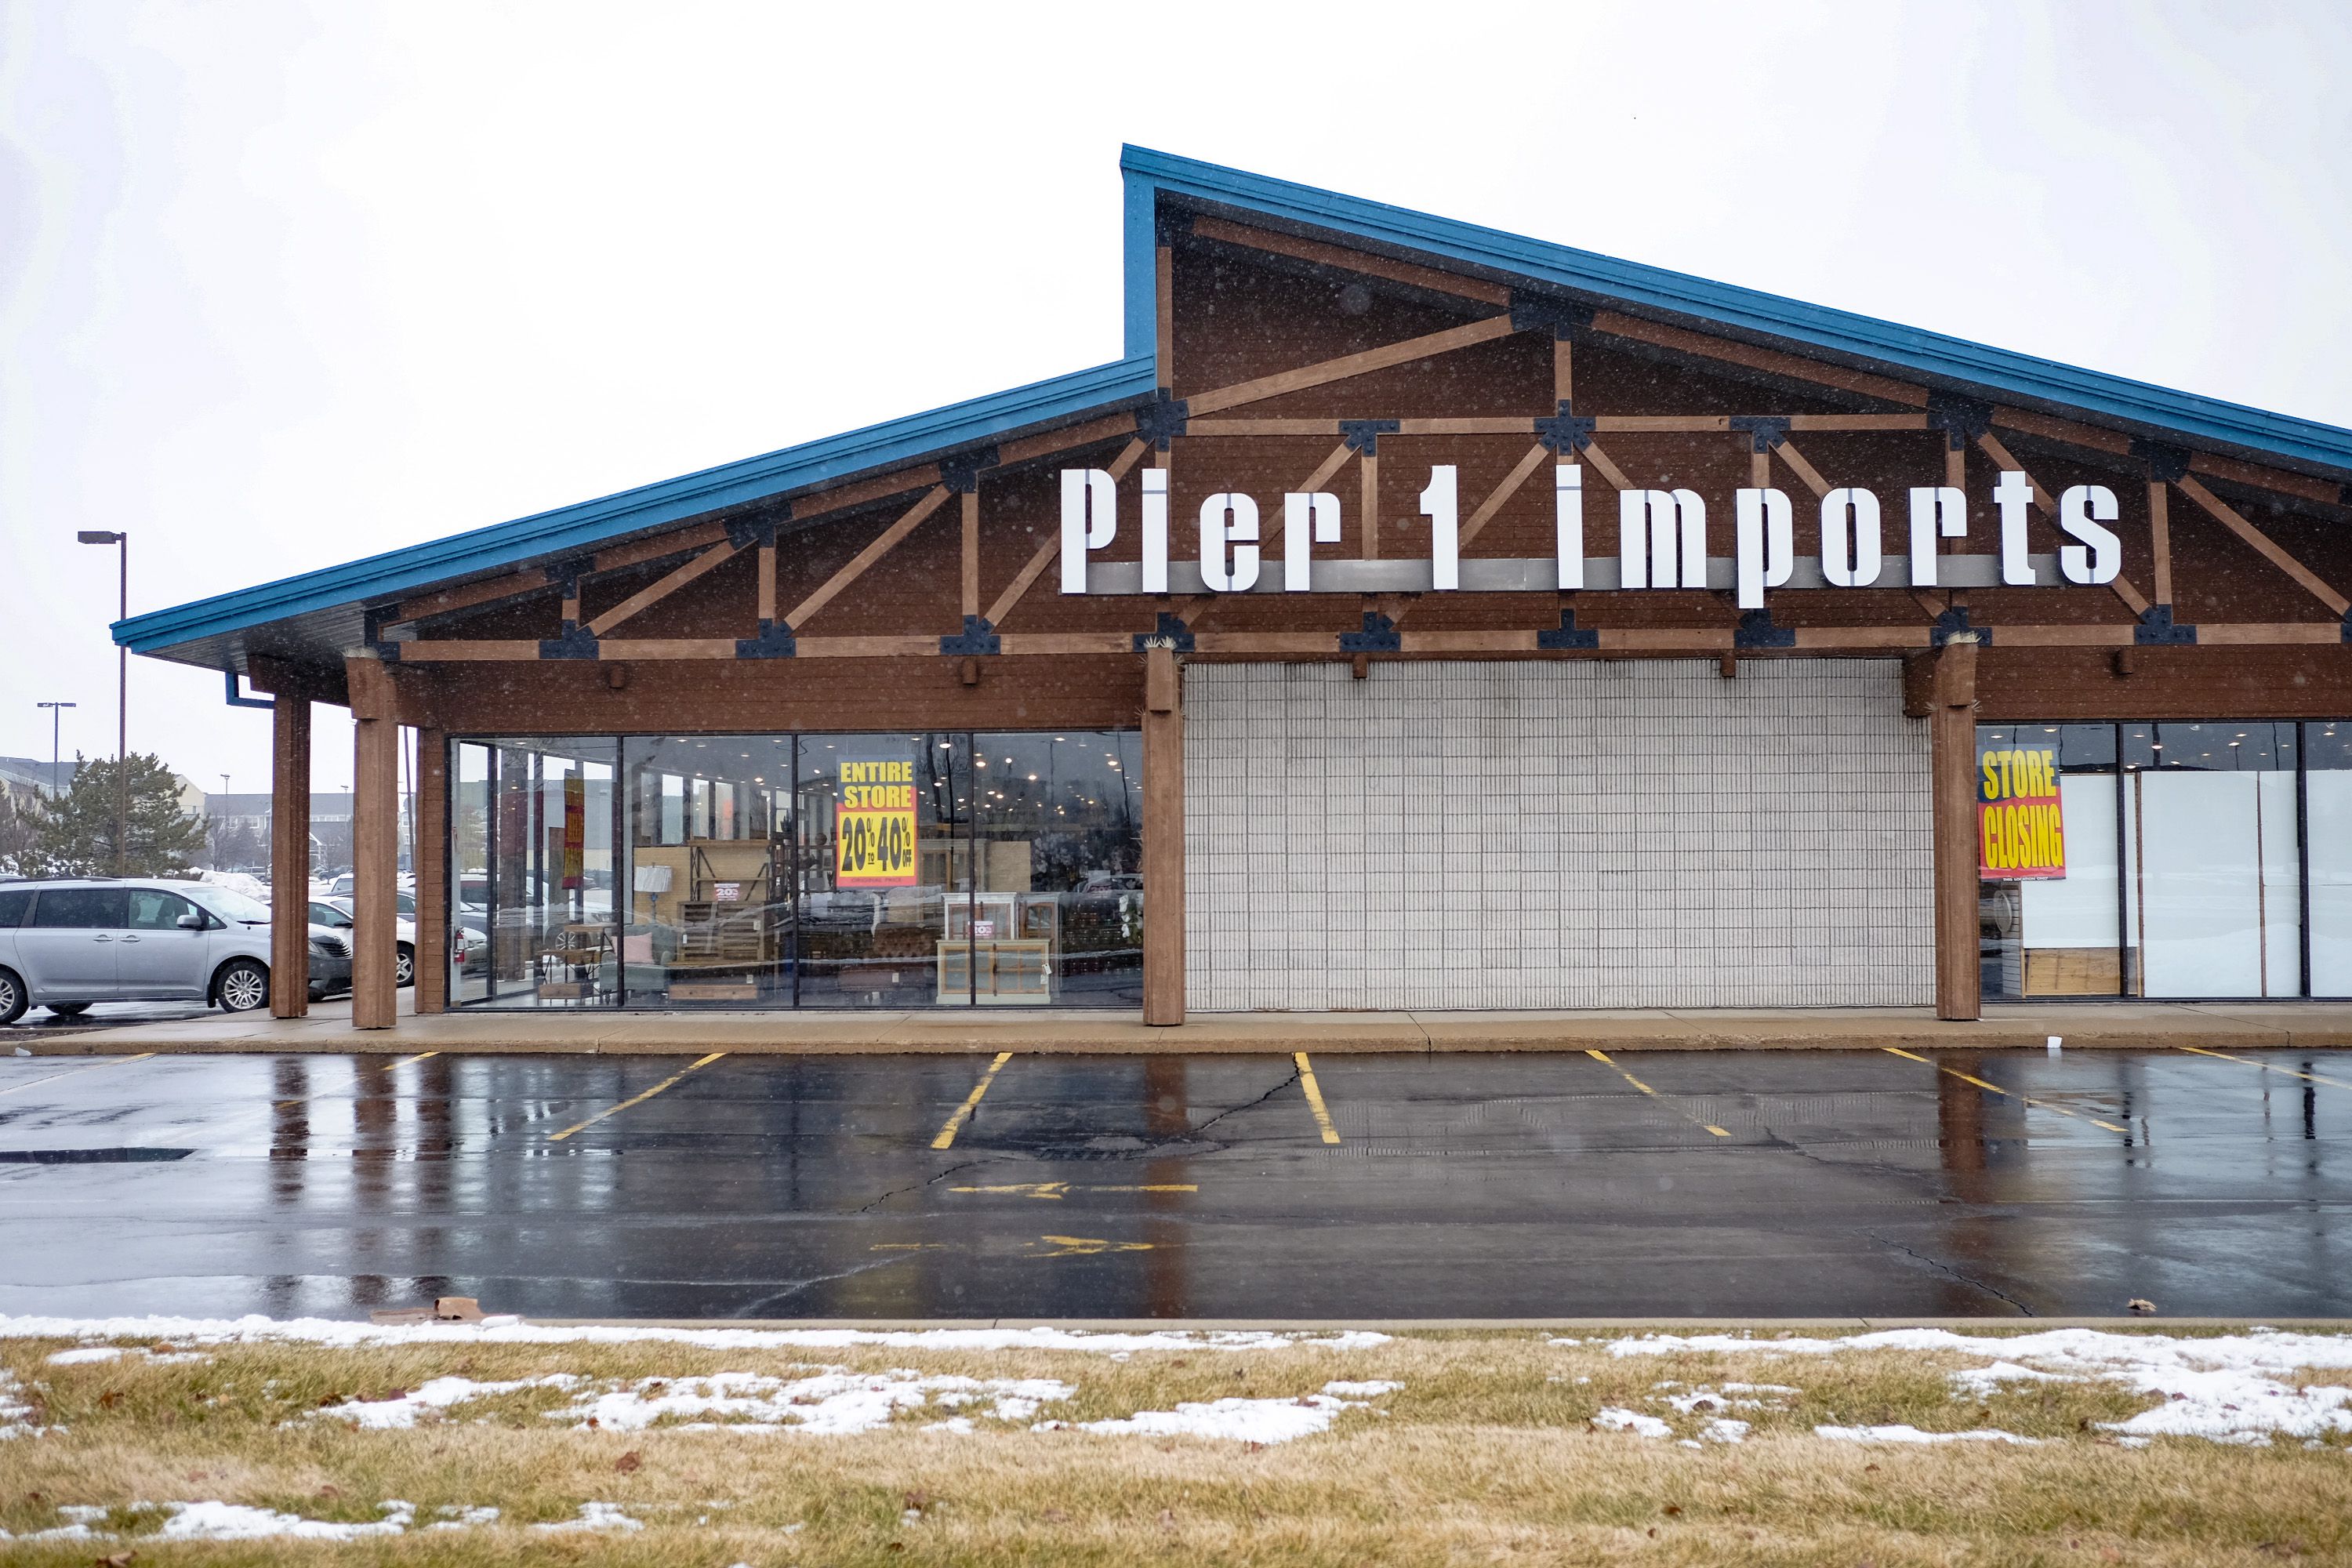 Pier 1 Imports, first opened in 1962, to close all remaining